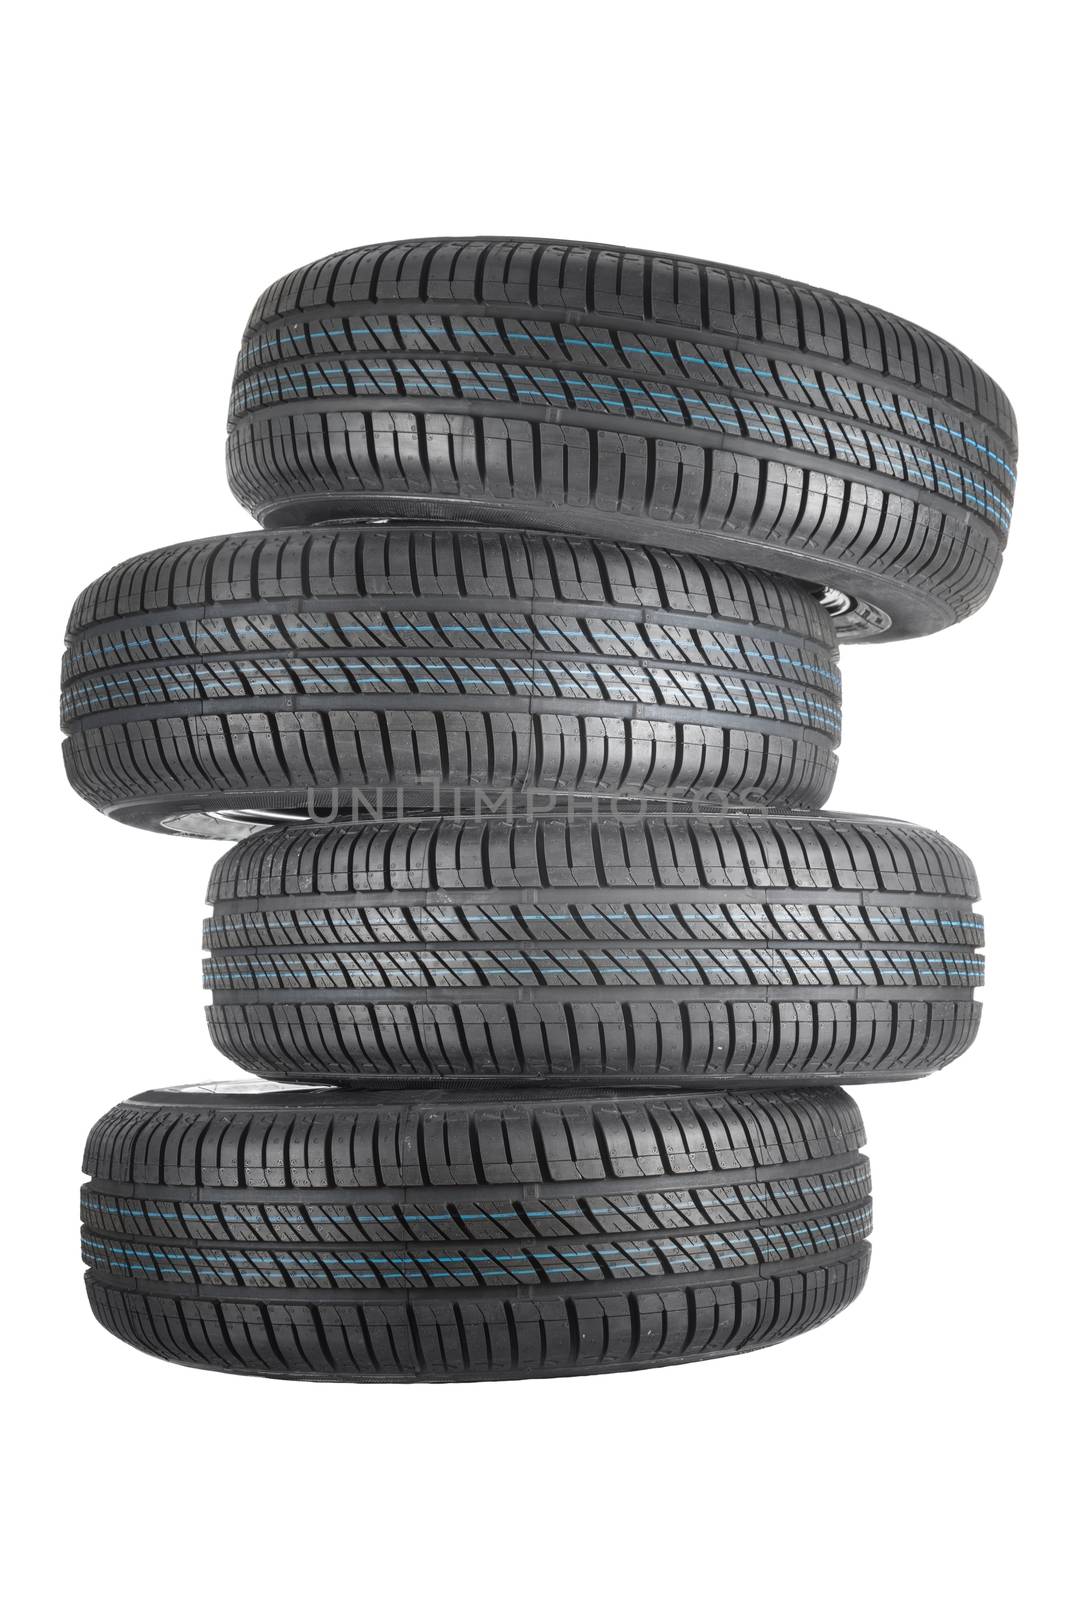 New and unused car tires against isolated background by svedoliver